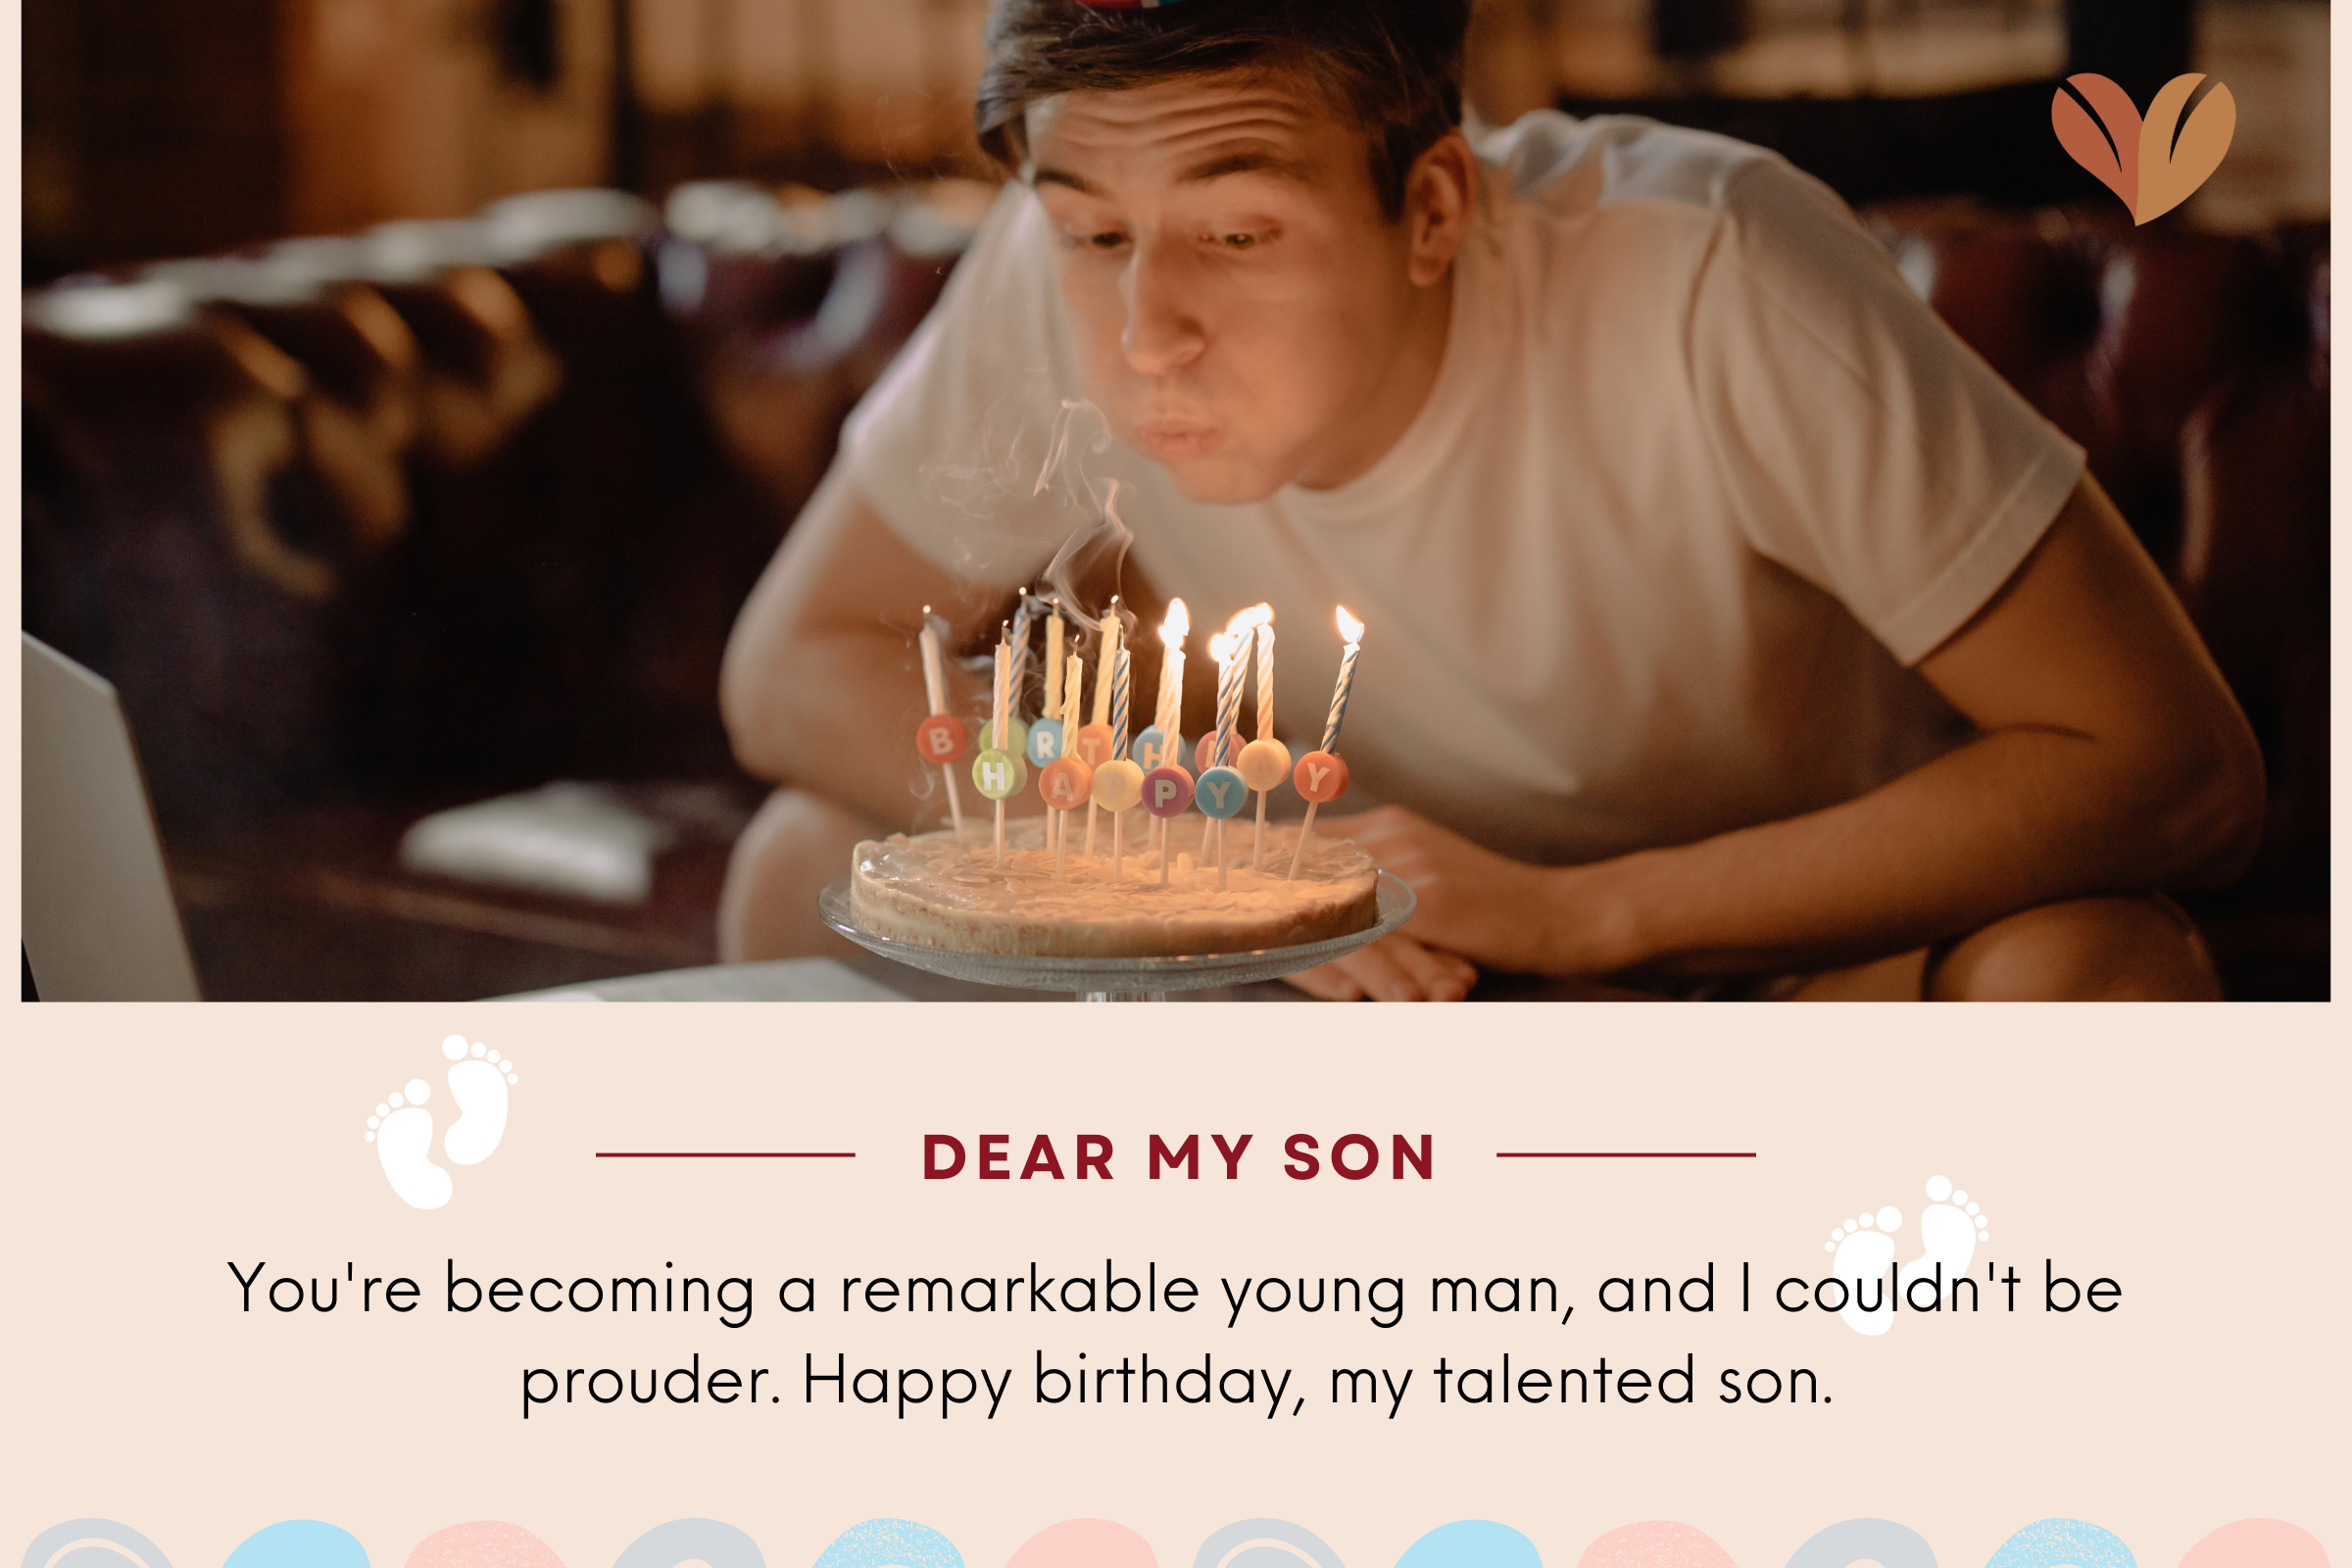 With a heart full of pride, I wish you a happy birthday, my son